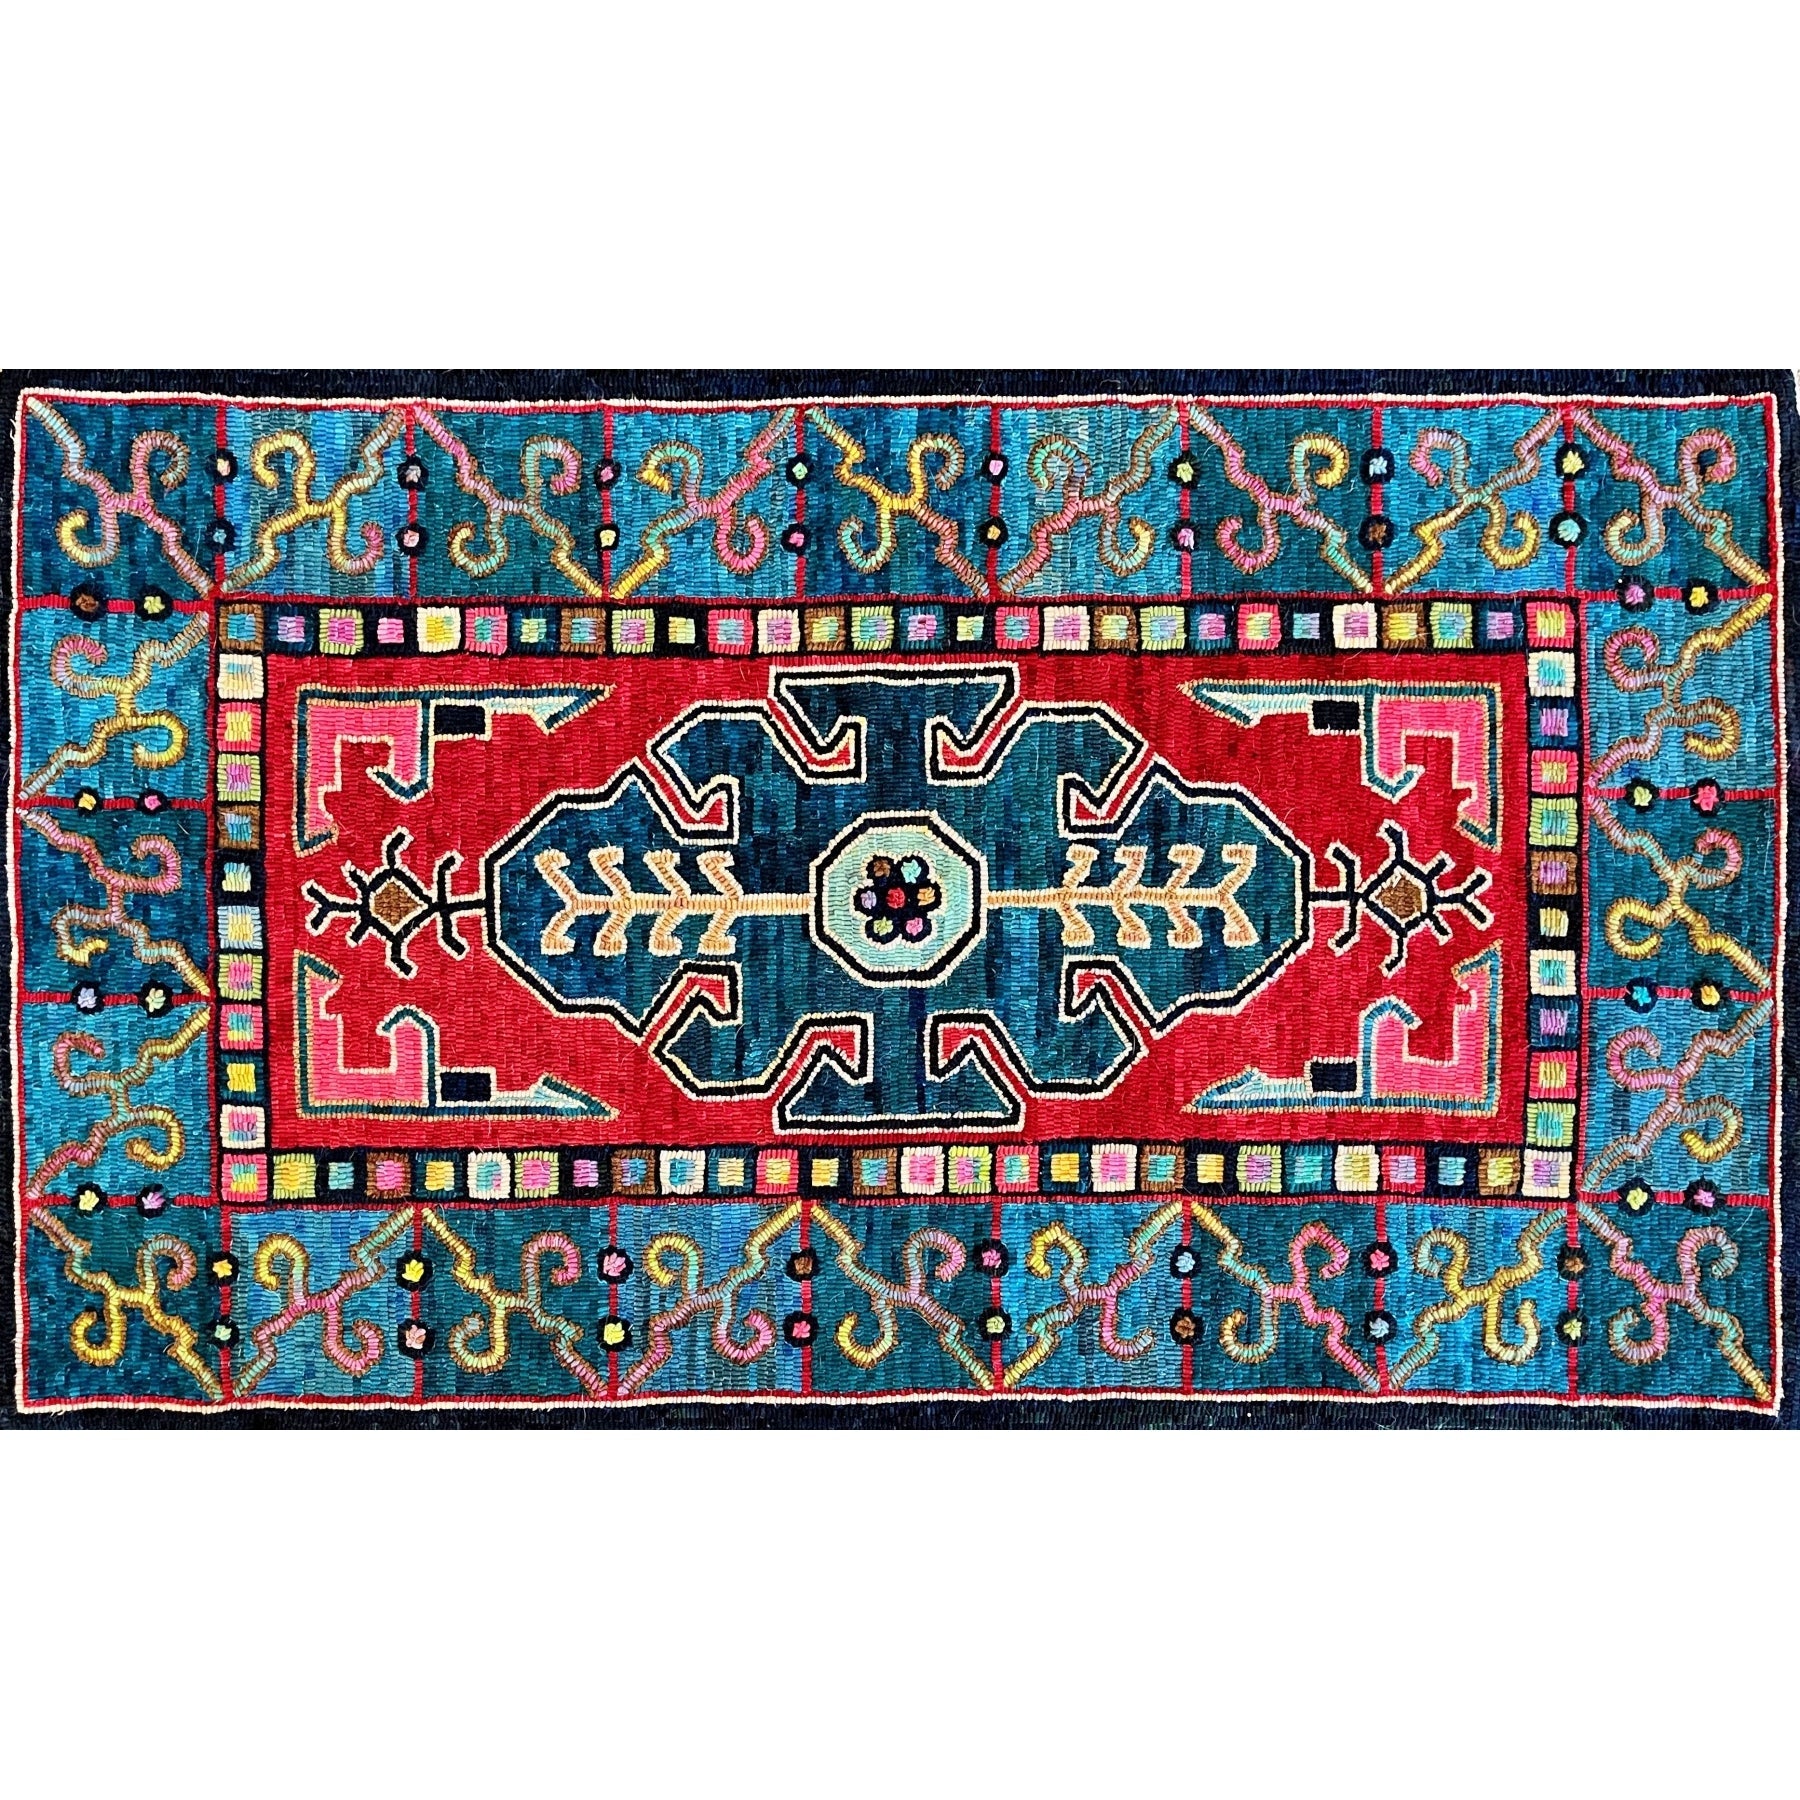 Turkish Primitive, rug hooked by Gina Paschal